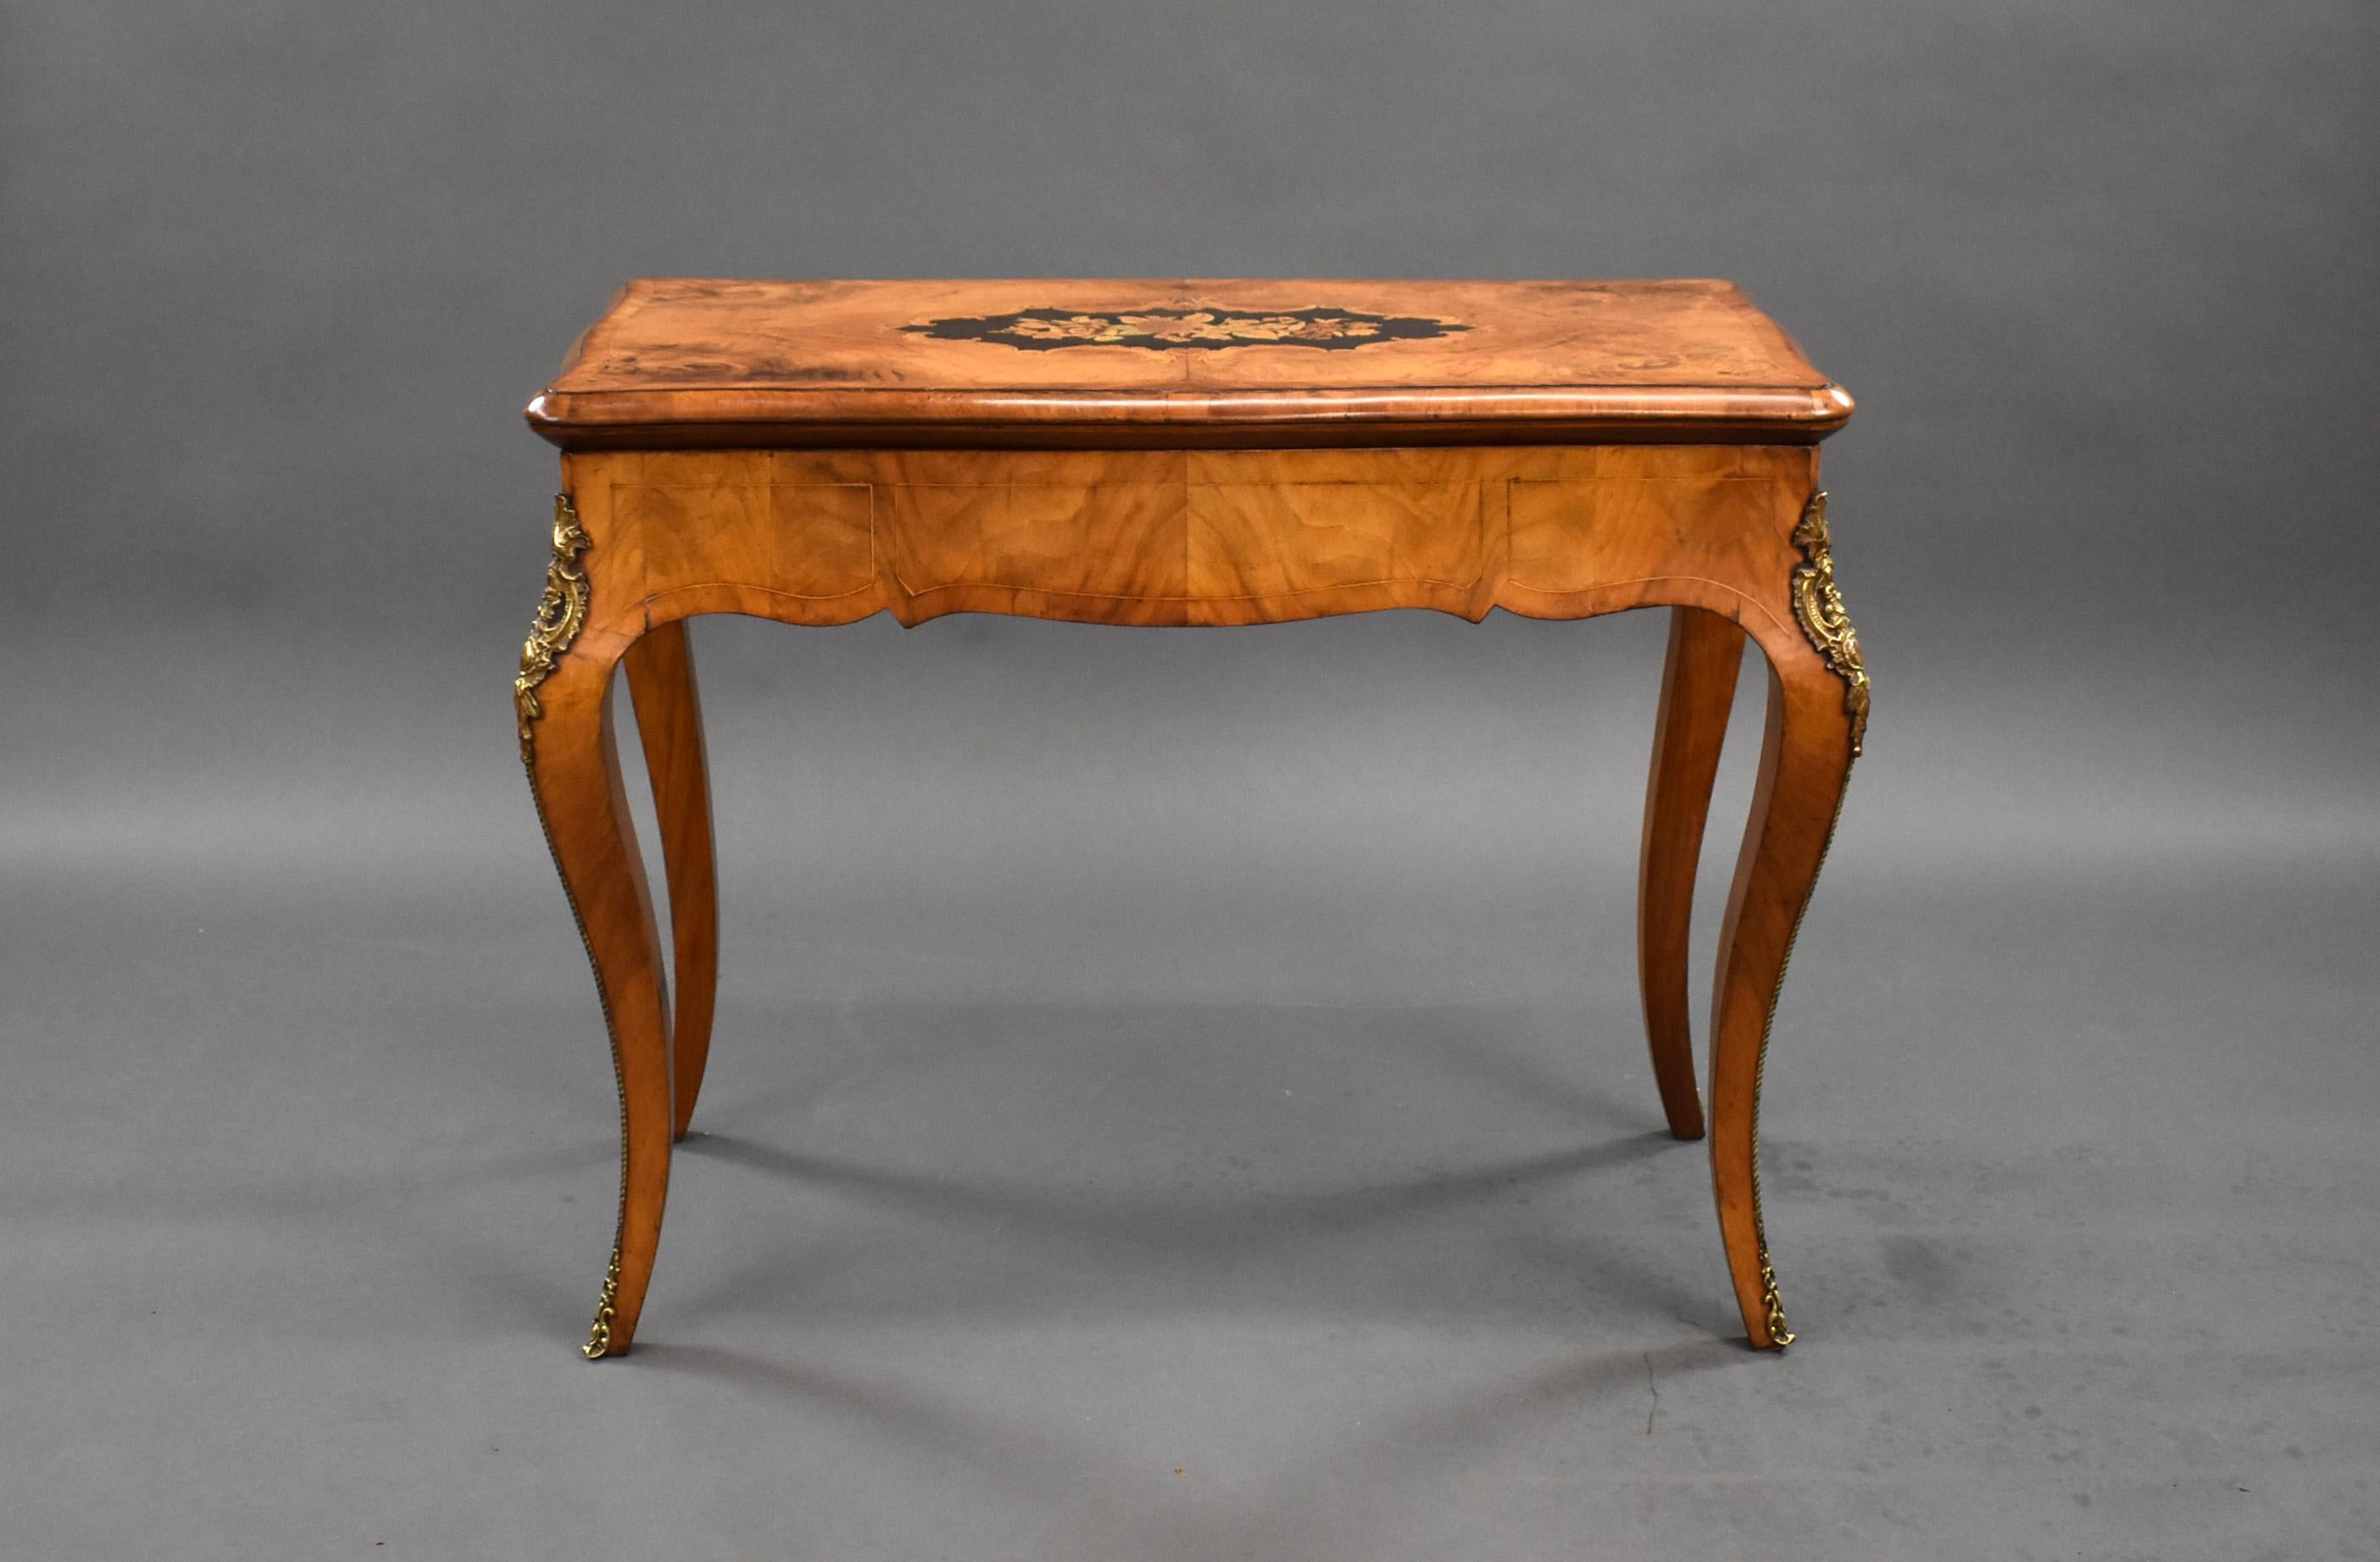 19th Century English Victorian Burl Walnut and Marquetry Inlaid Card Table For Sale 2